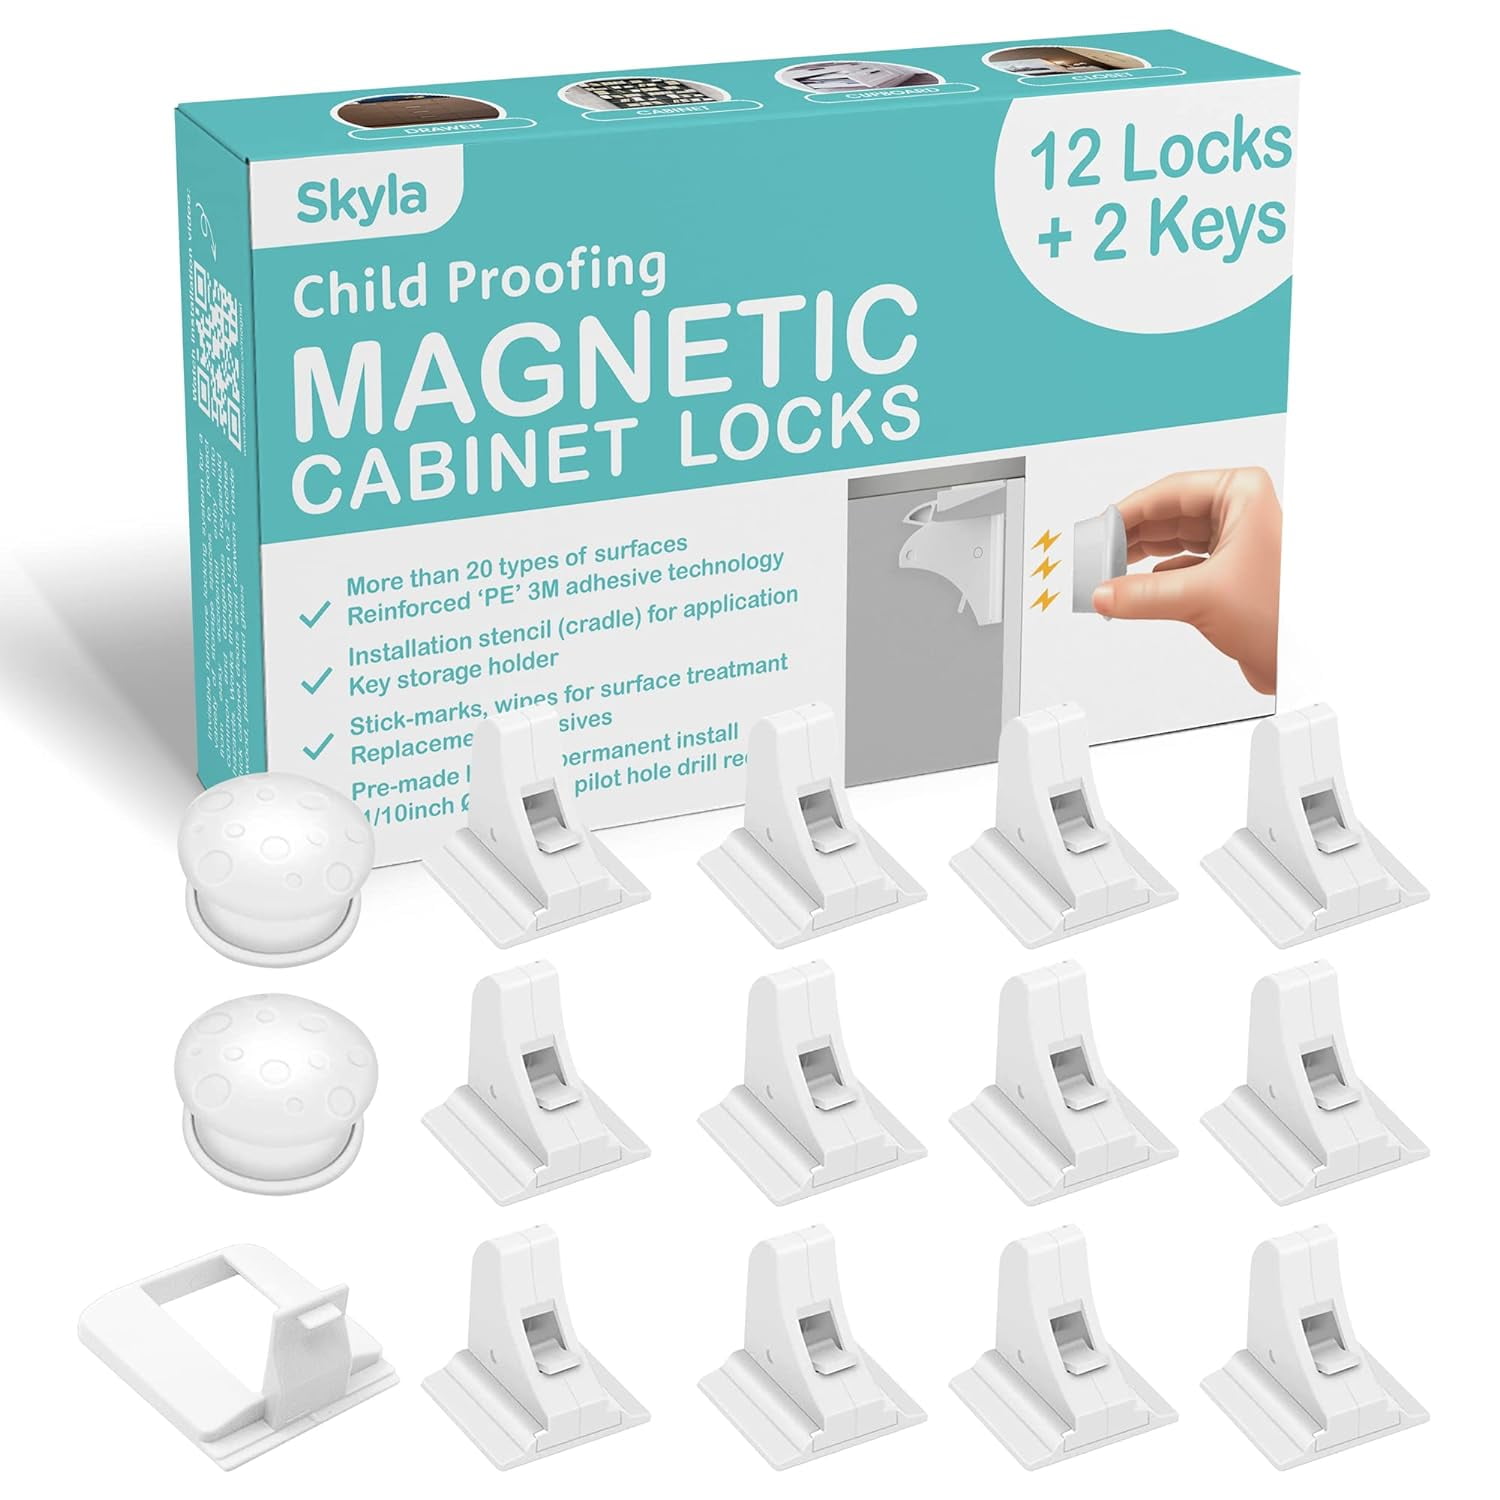 How to Install Magnetic Cabinet Locks  Baby Proofing Magnetic Cabinet Locks  